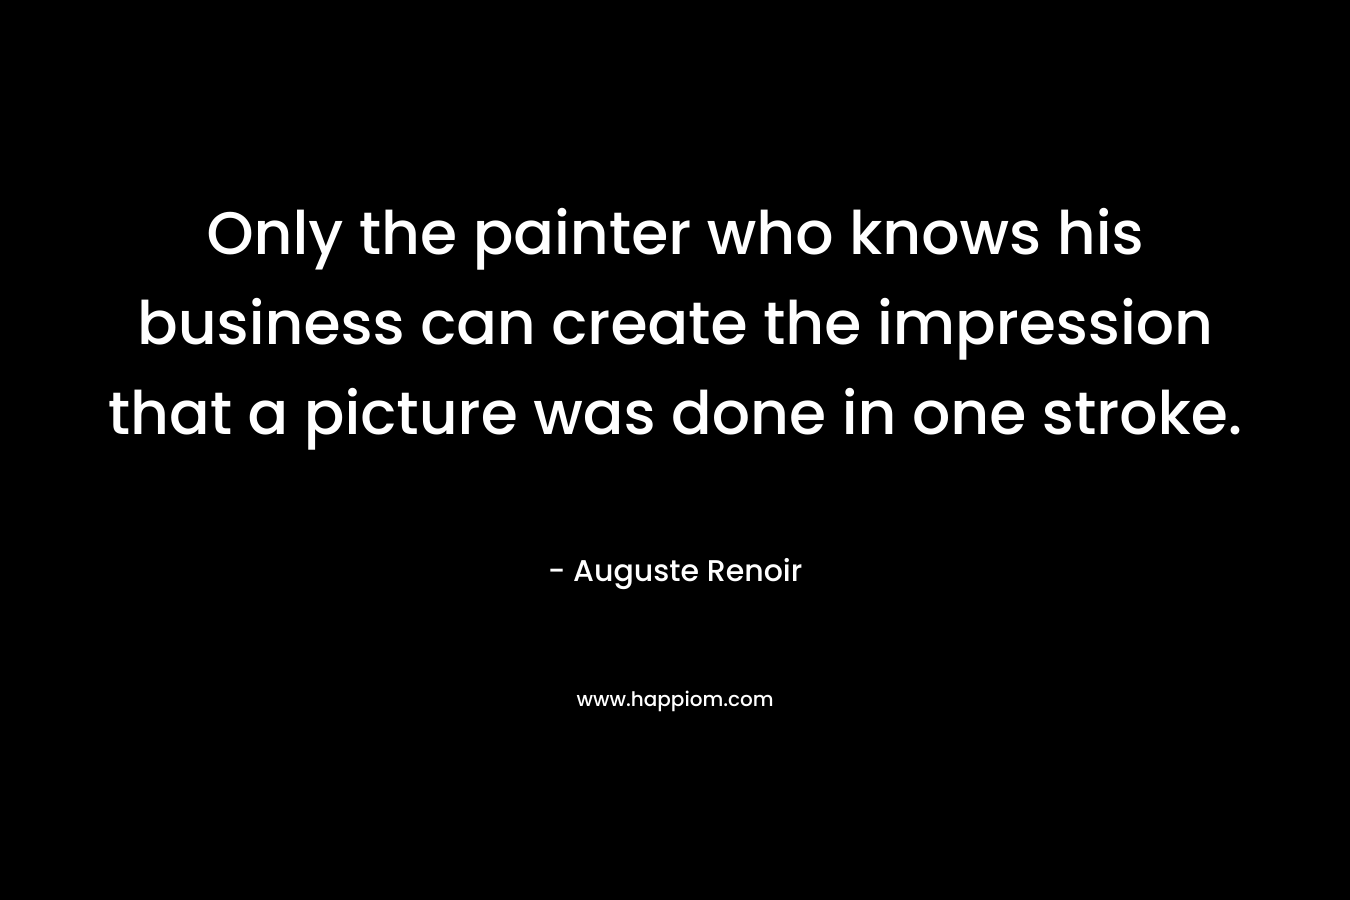 Only the painter who knows his business can create the impression that a picture was done in one stroke.